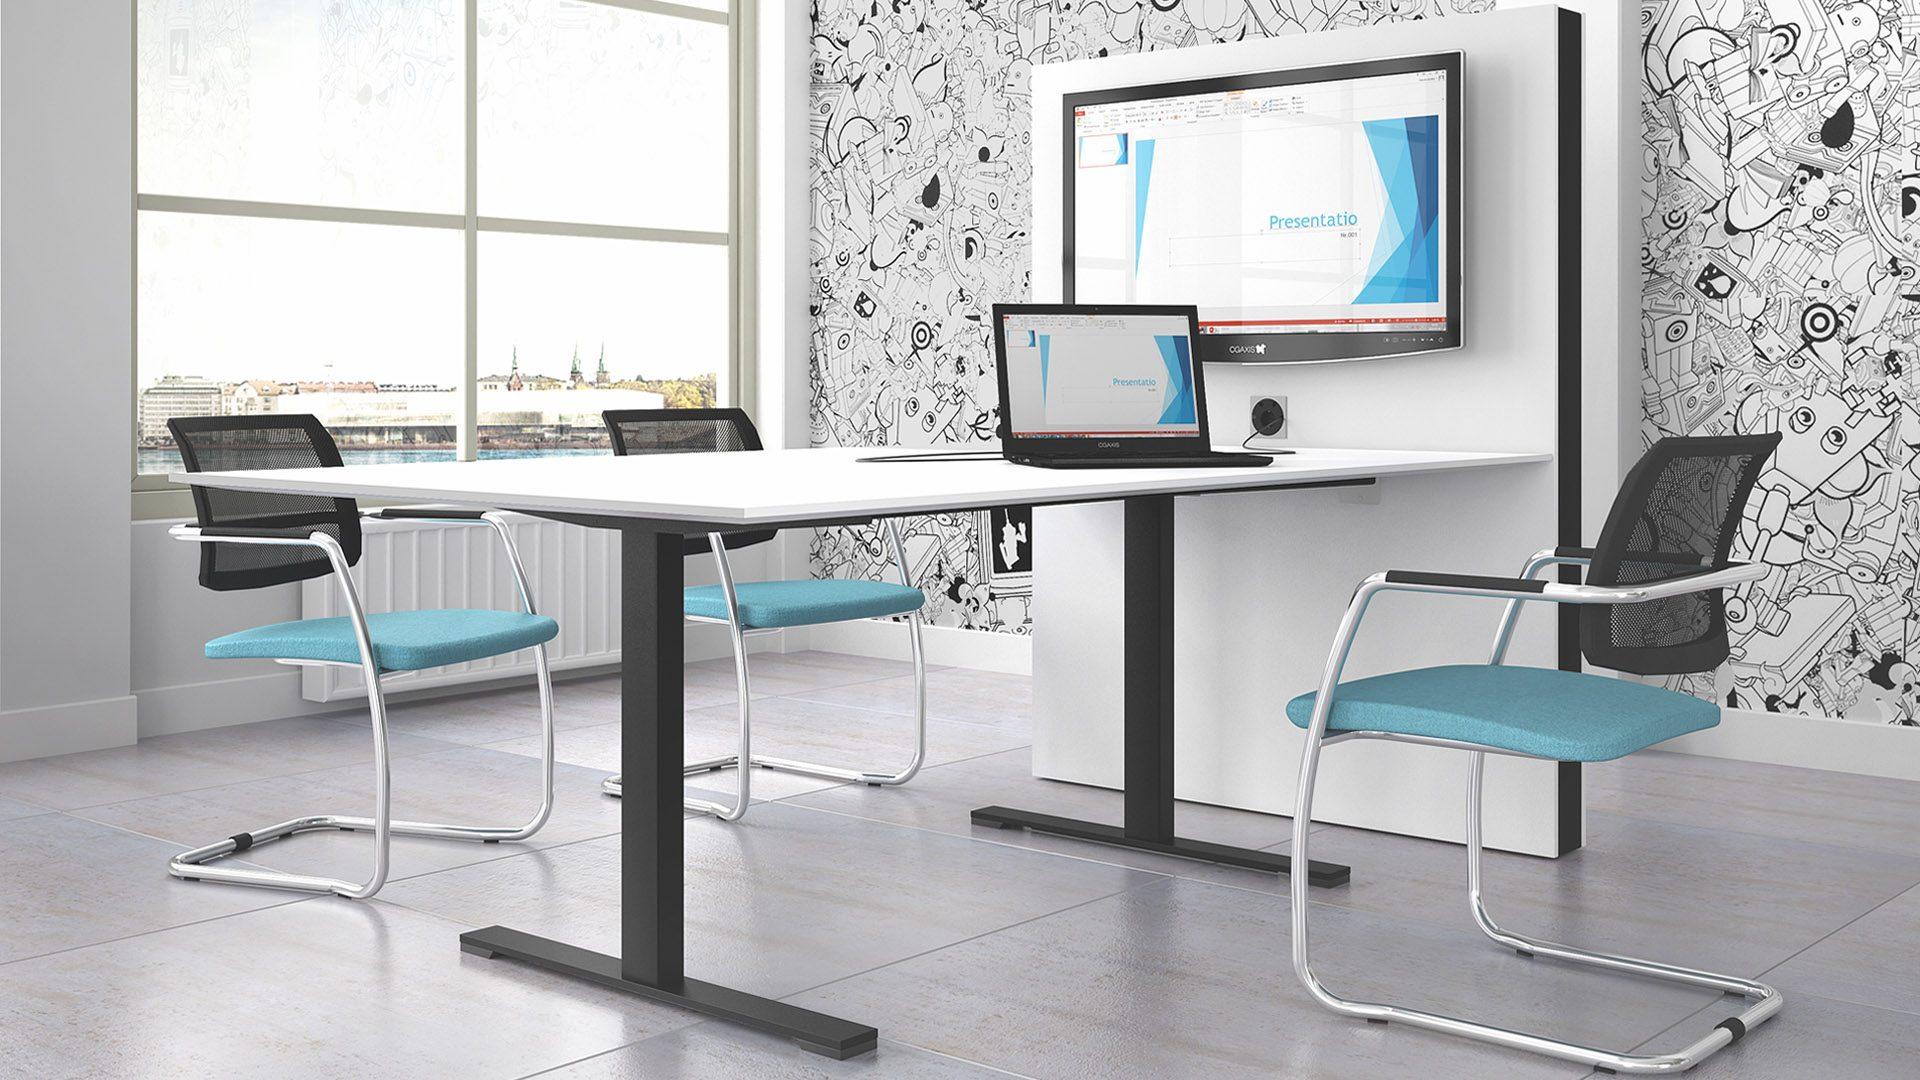 Create collaborative meeting spaces with Jazz Meeting Tables and Media Wall